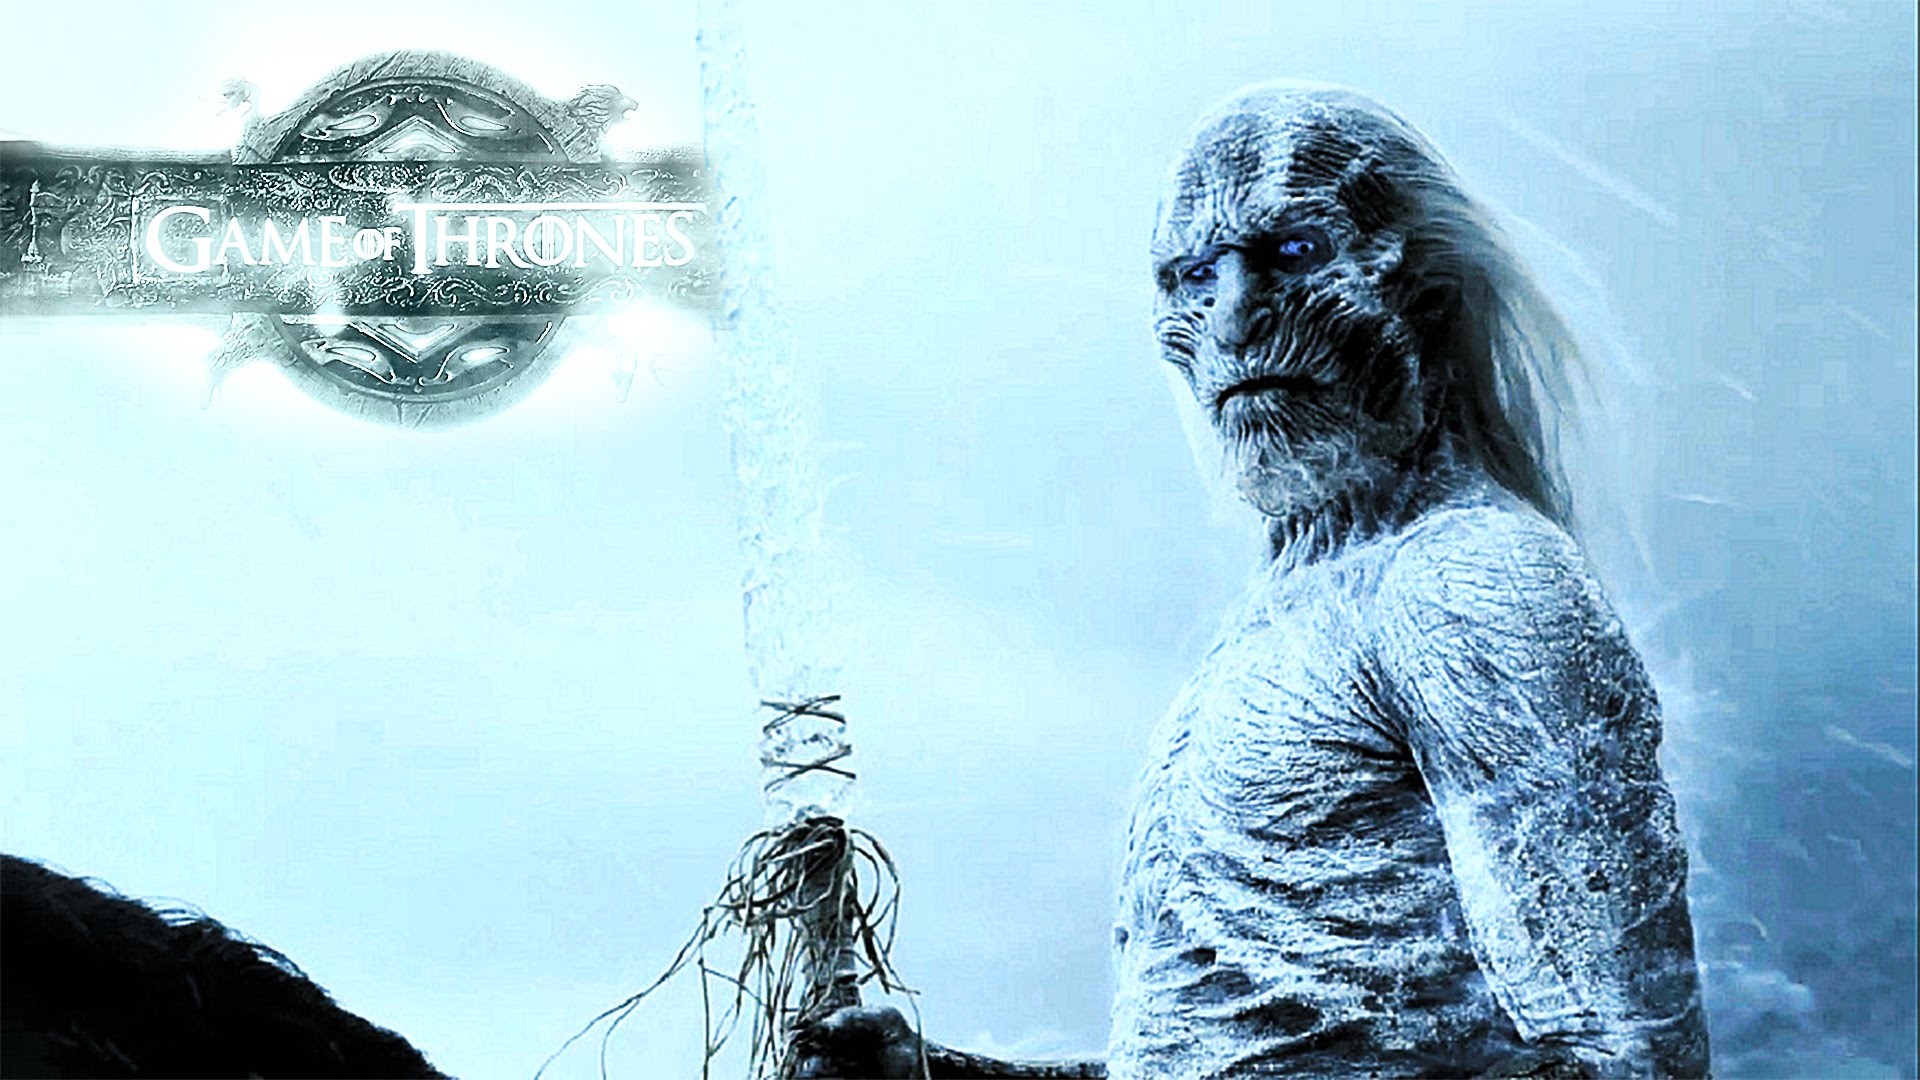 Games of Thrones – White Walkers